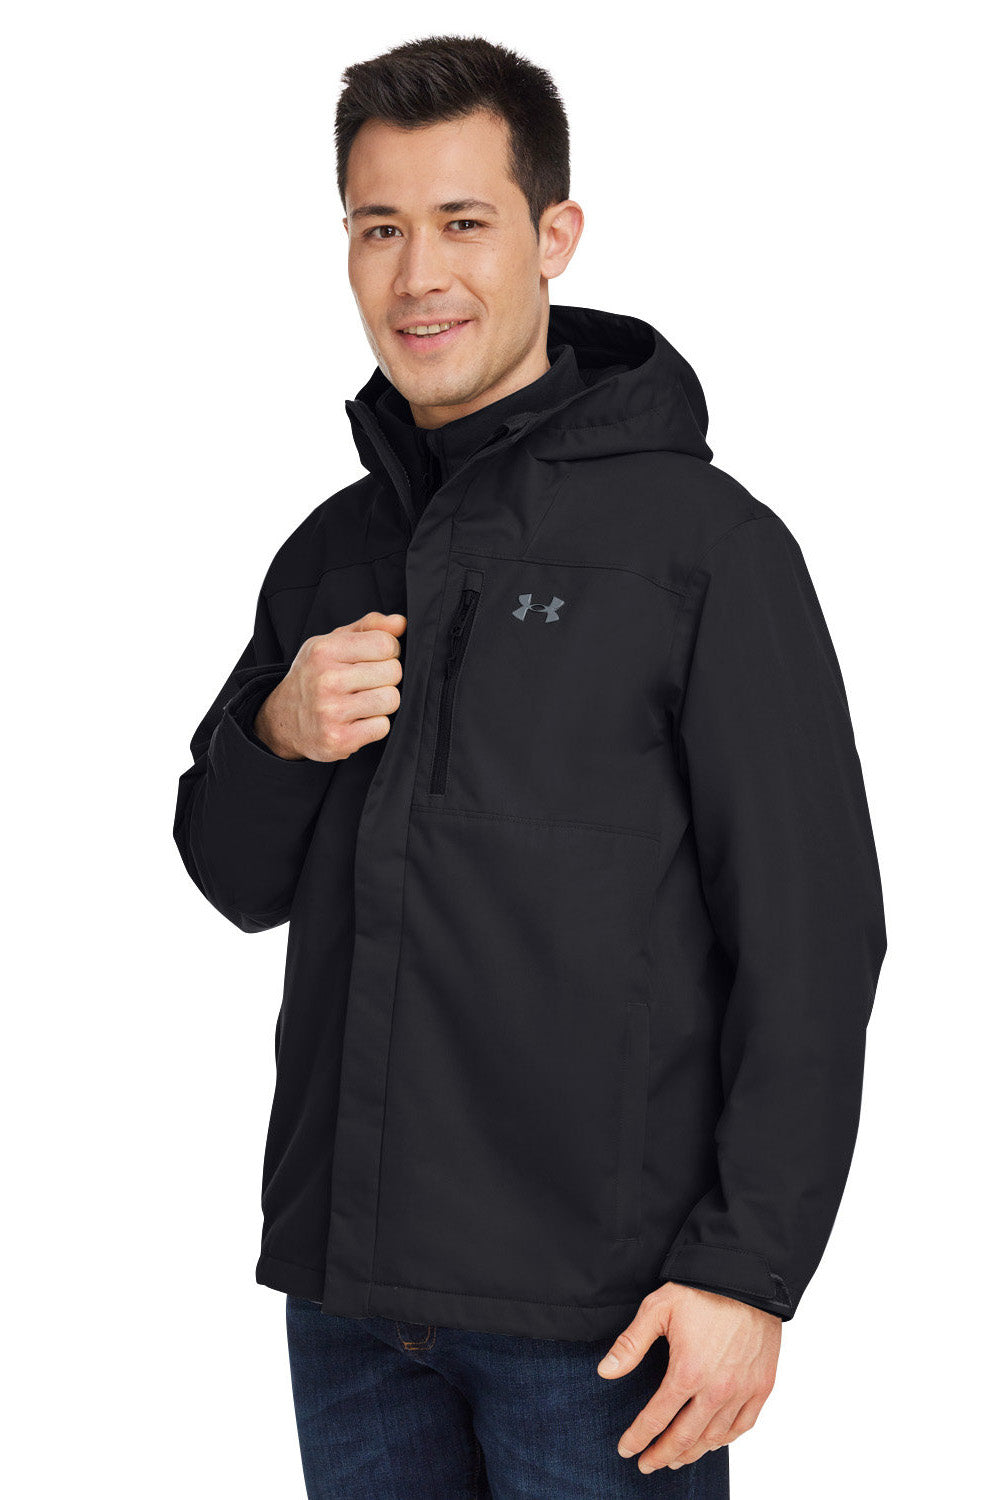 Under Armour 1371585 Mens Porter 2.0 Moisture Wicking 3-In-1 Full Zip Hooded Jacket Black/Pitch Grey Model 3Q